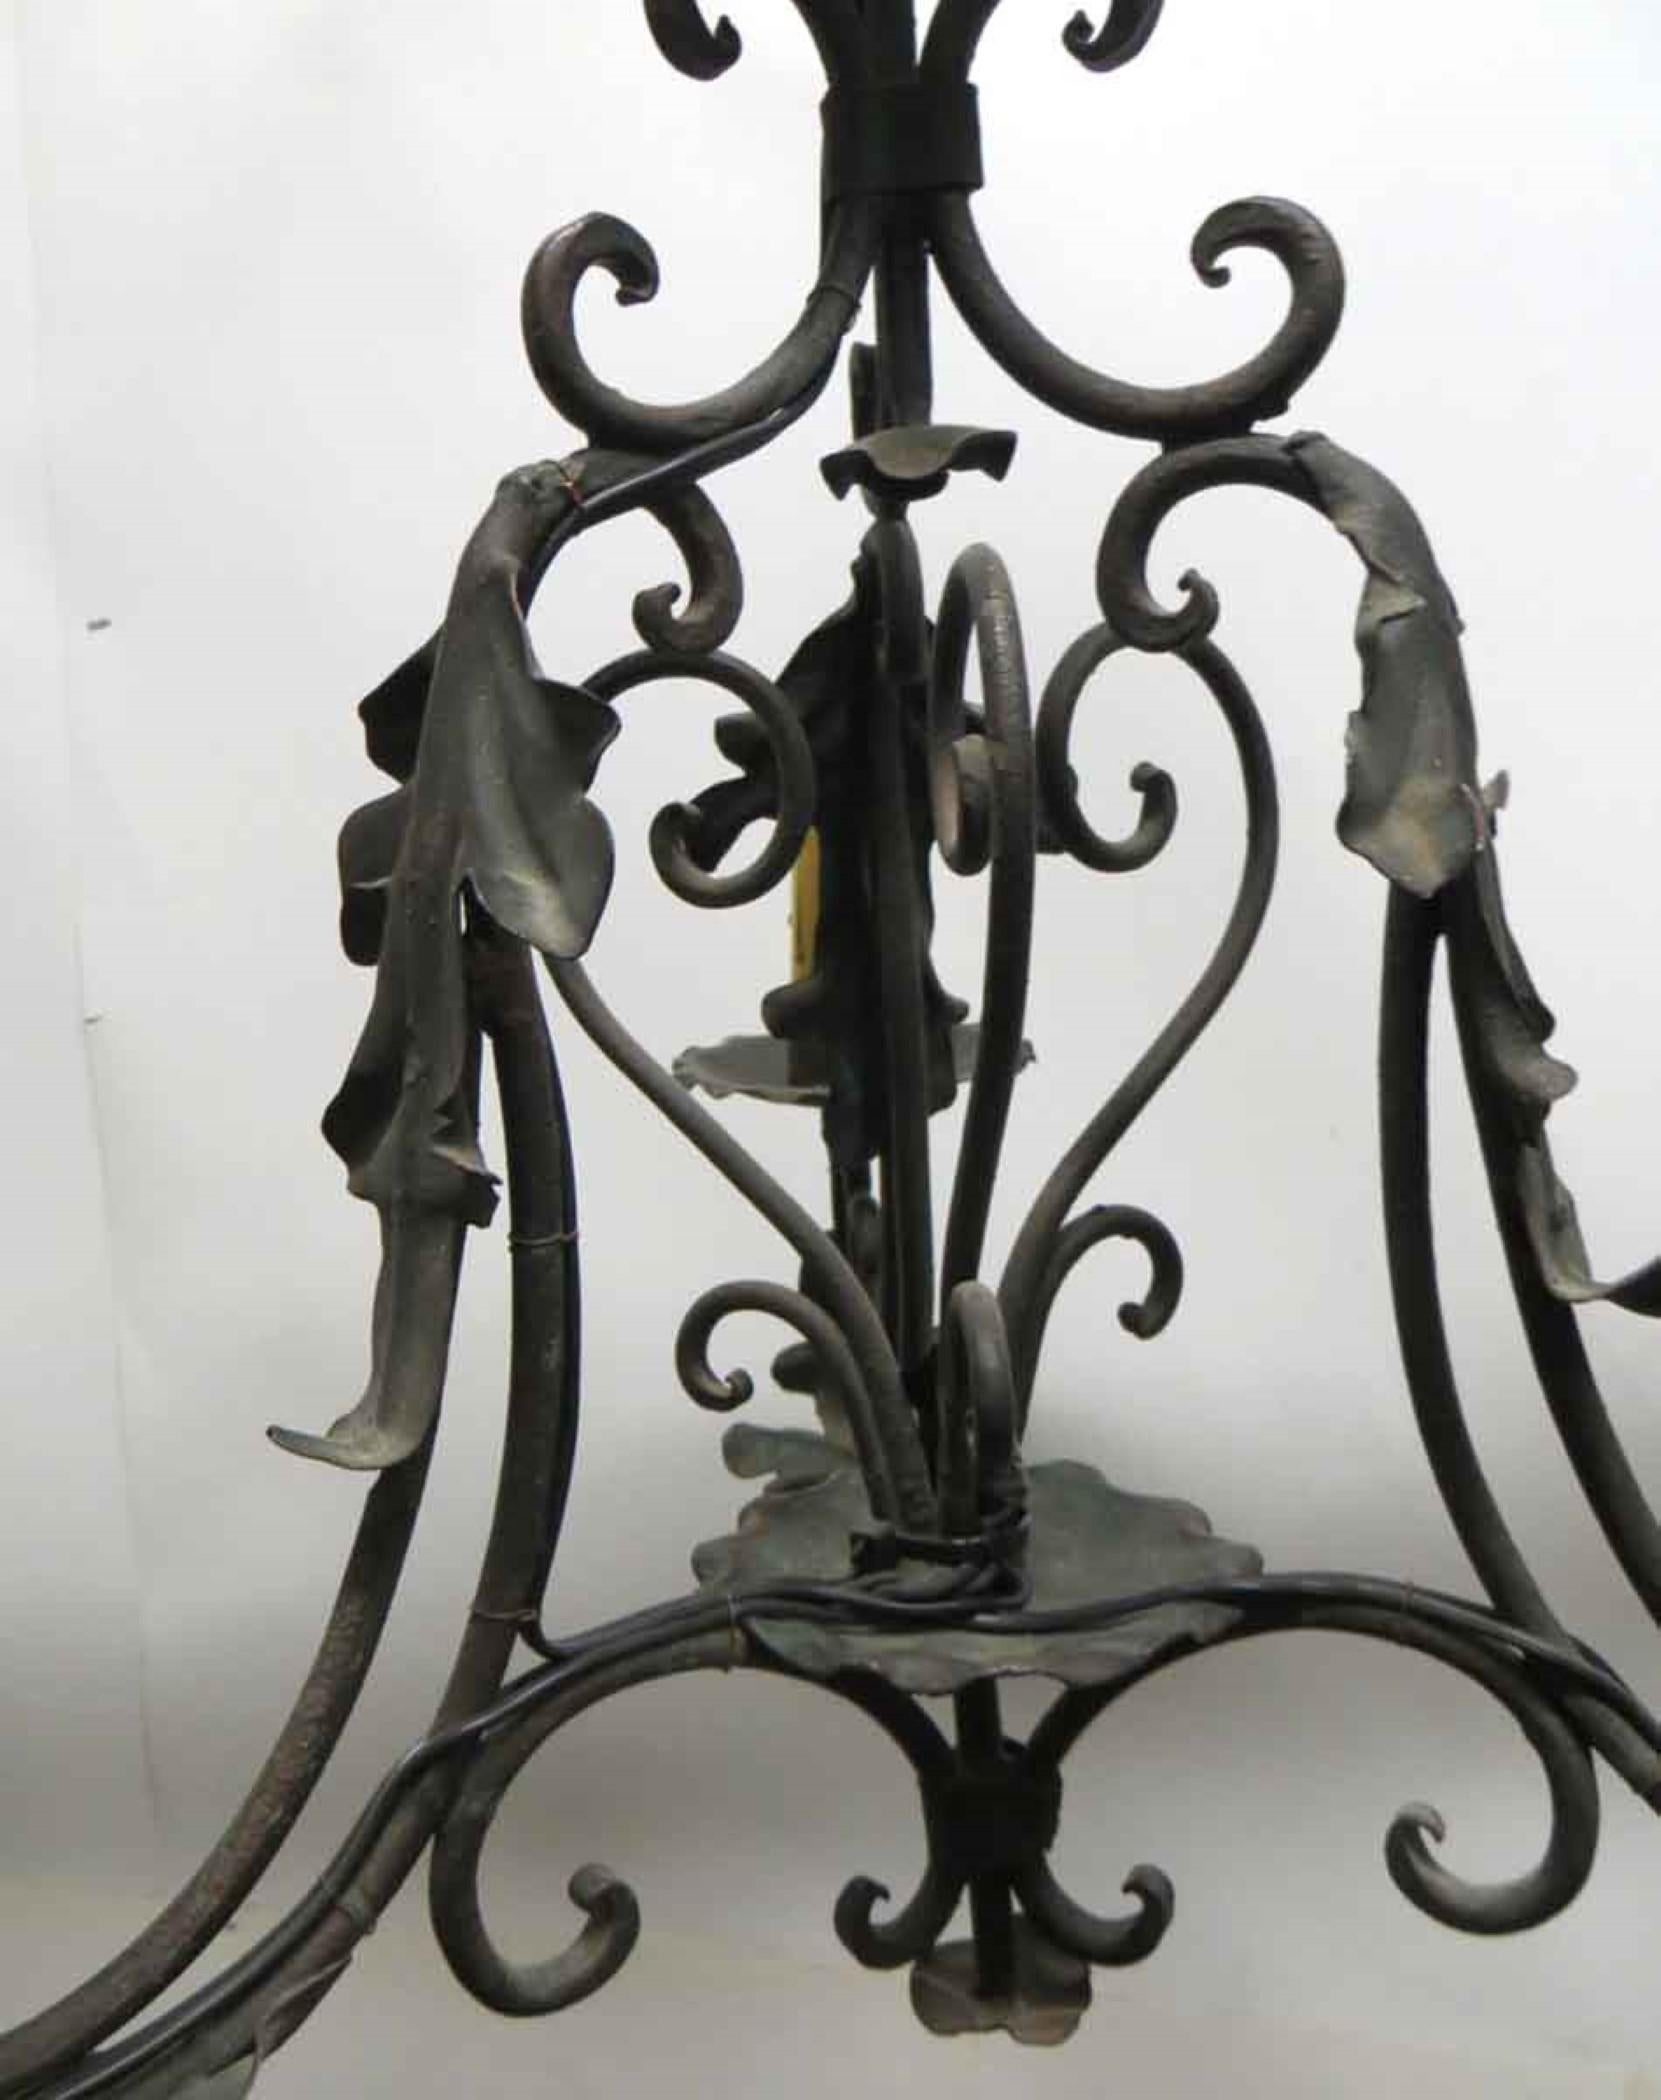 North American Petite Arts & Crafts 3-Arm Wrought Iron Chandelier